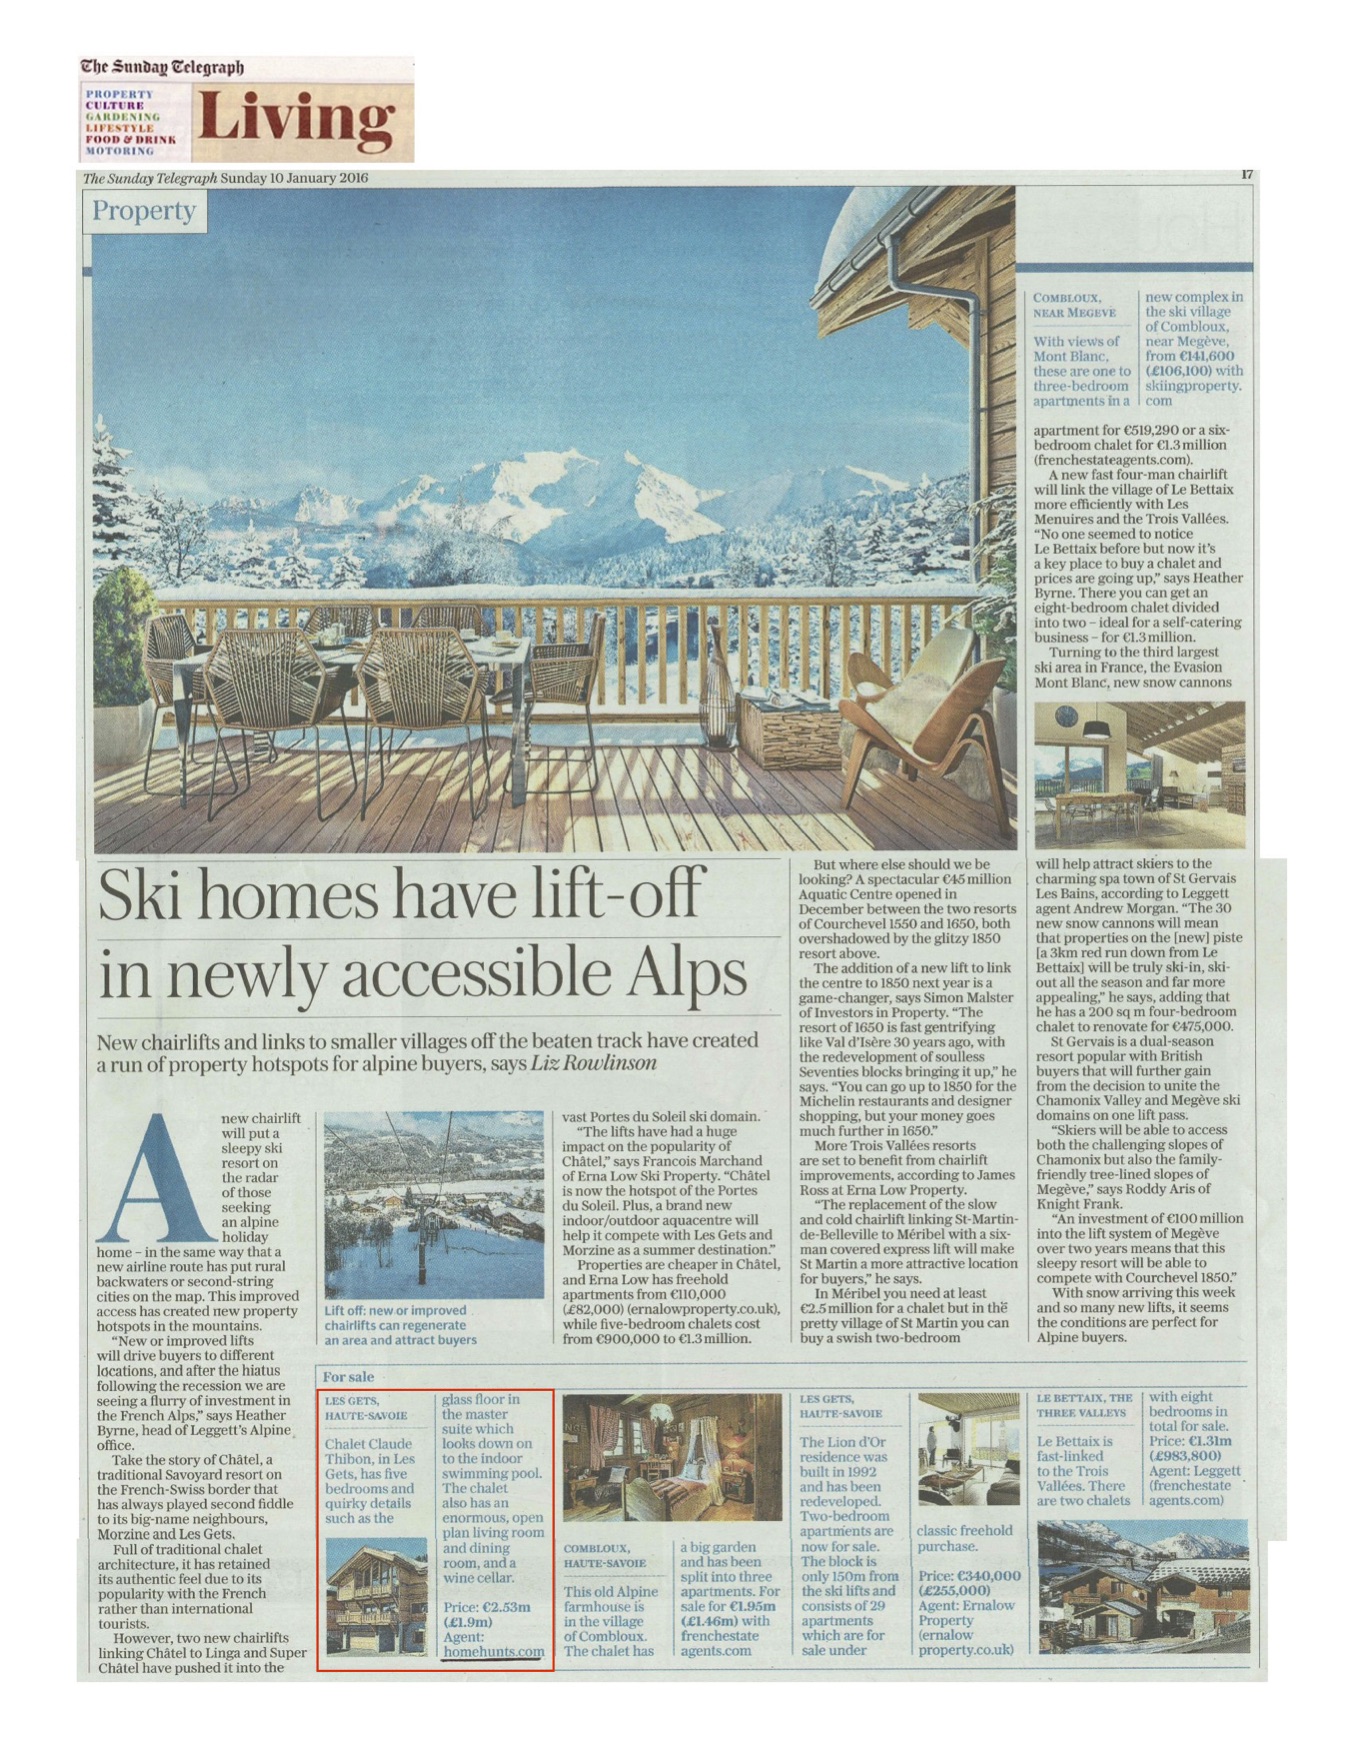 Sunday Telegraph – French Alps property